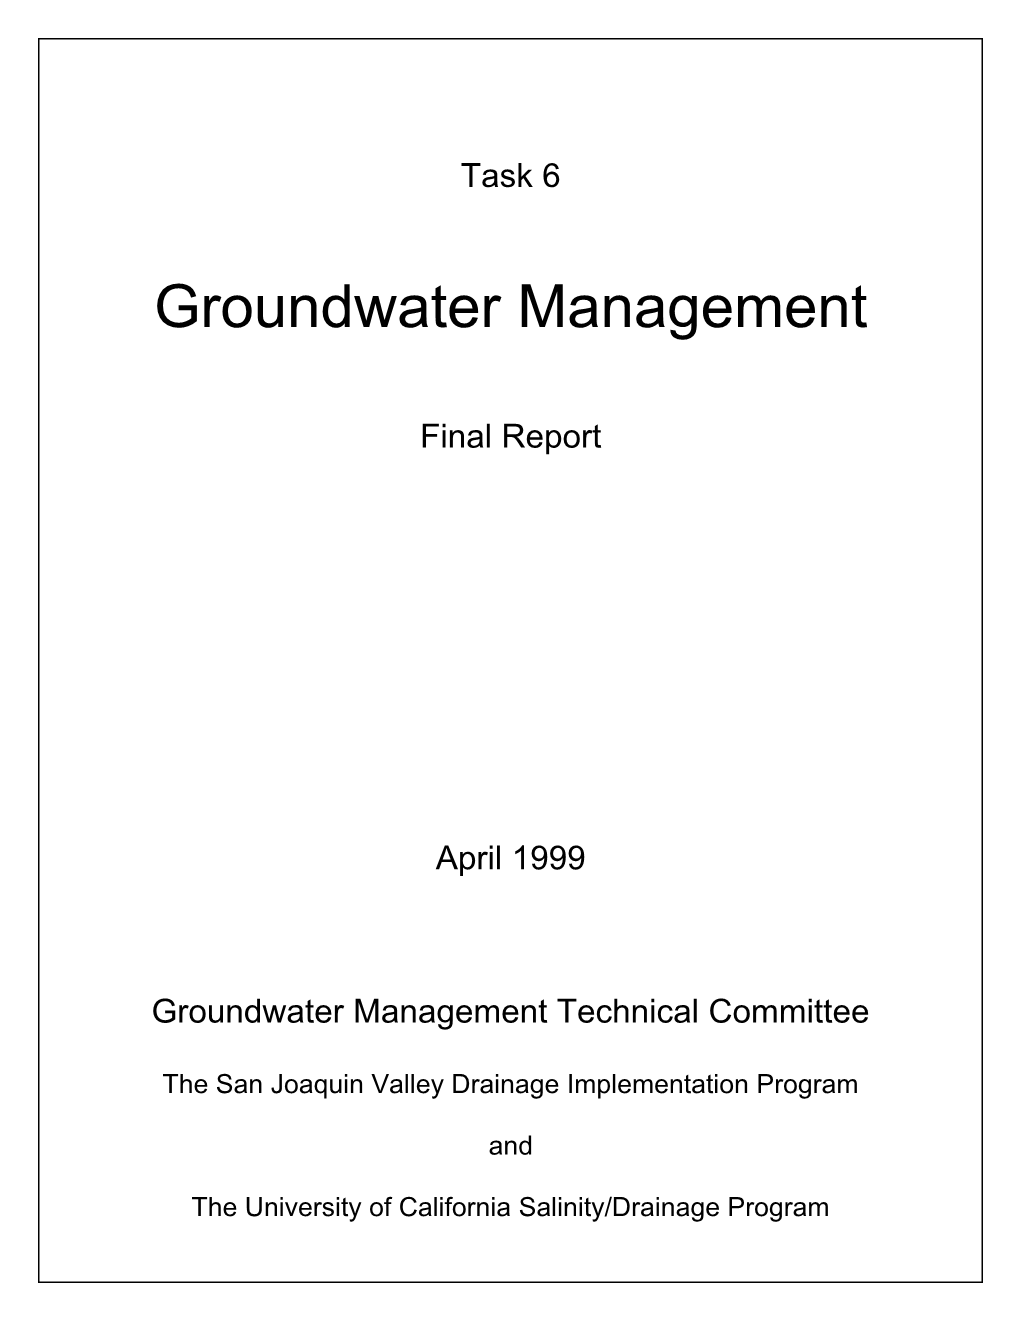 Groundwater Management Technical Committee